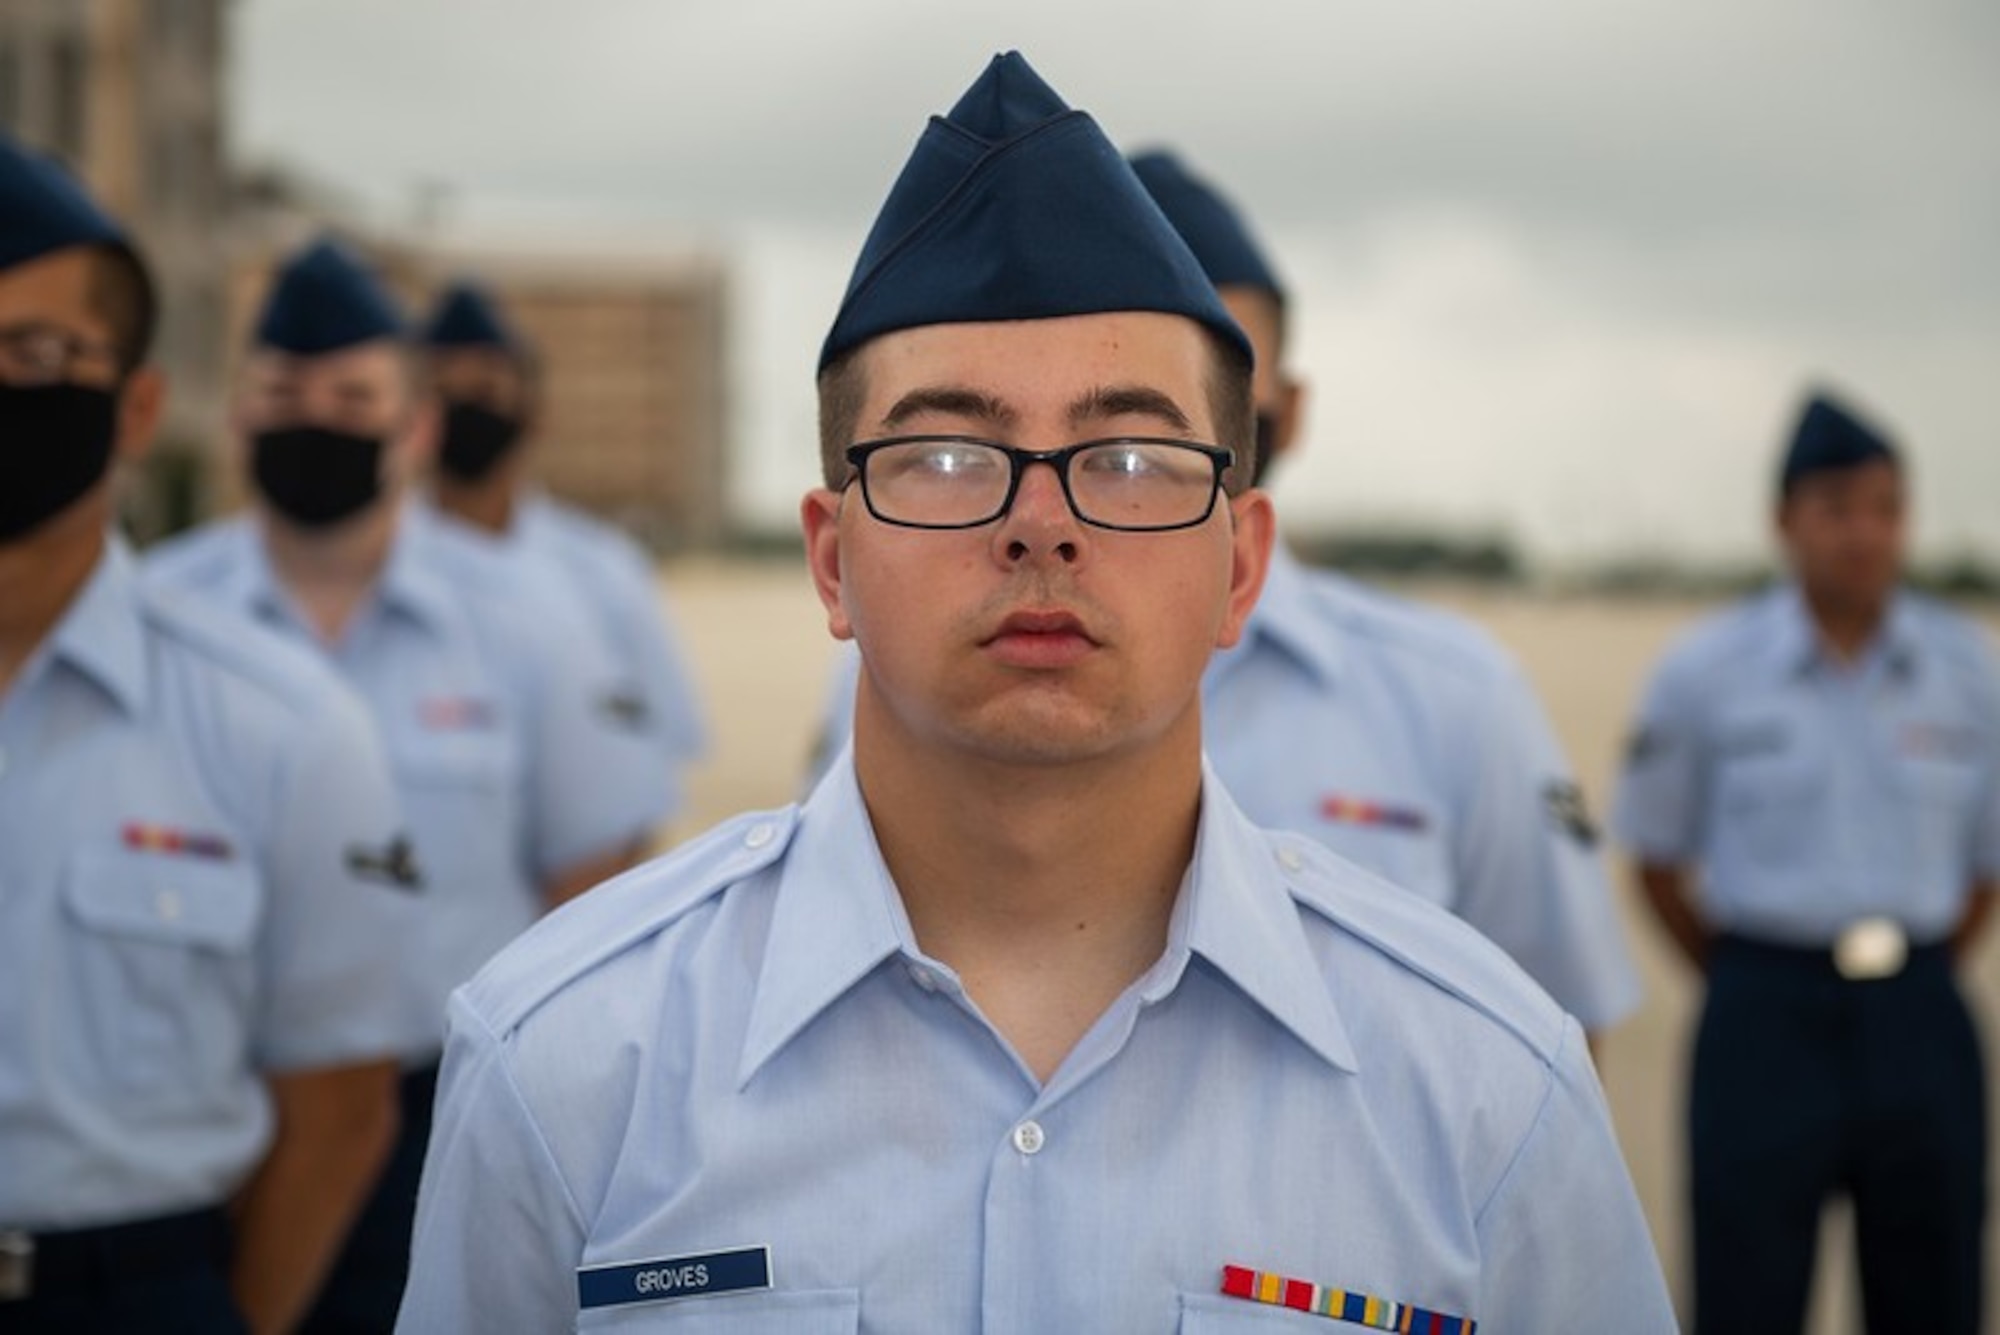 U.S. Space Force Specialist Ethan Groves, a native of Alaska, graduated U.S. Air Force Basic Military Training at Lackland Air Force Base, San Antonio, Texas, June 24, 2021. Groves is Alaska’s first U.S. Space Force Guardian recruit, with the U.S. Space Force being a growing enterprise that organizes, trains and equips Space Forces to protect national security interests in the space domain.  (U.S. Air Force courtesy photo)